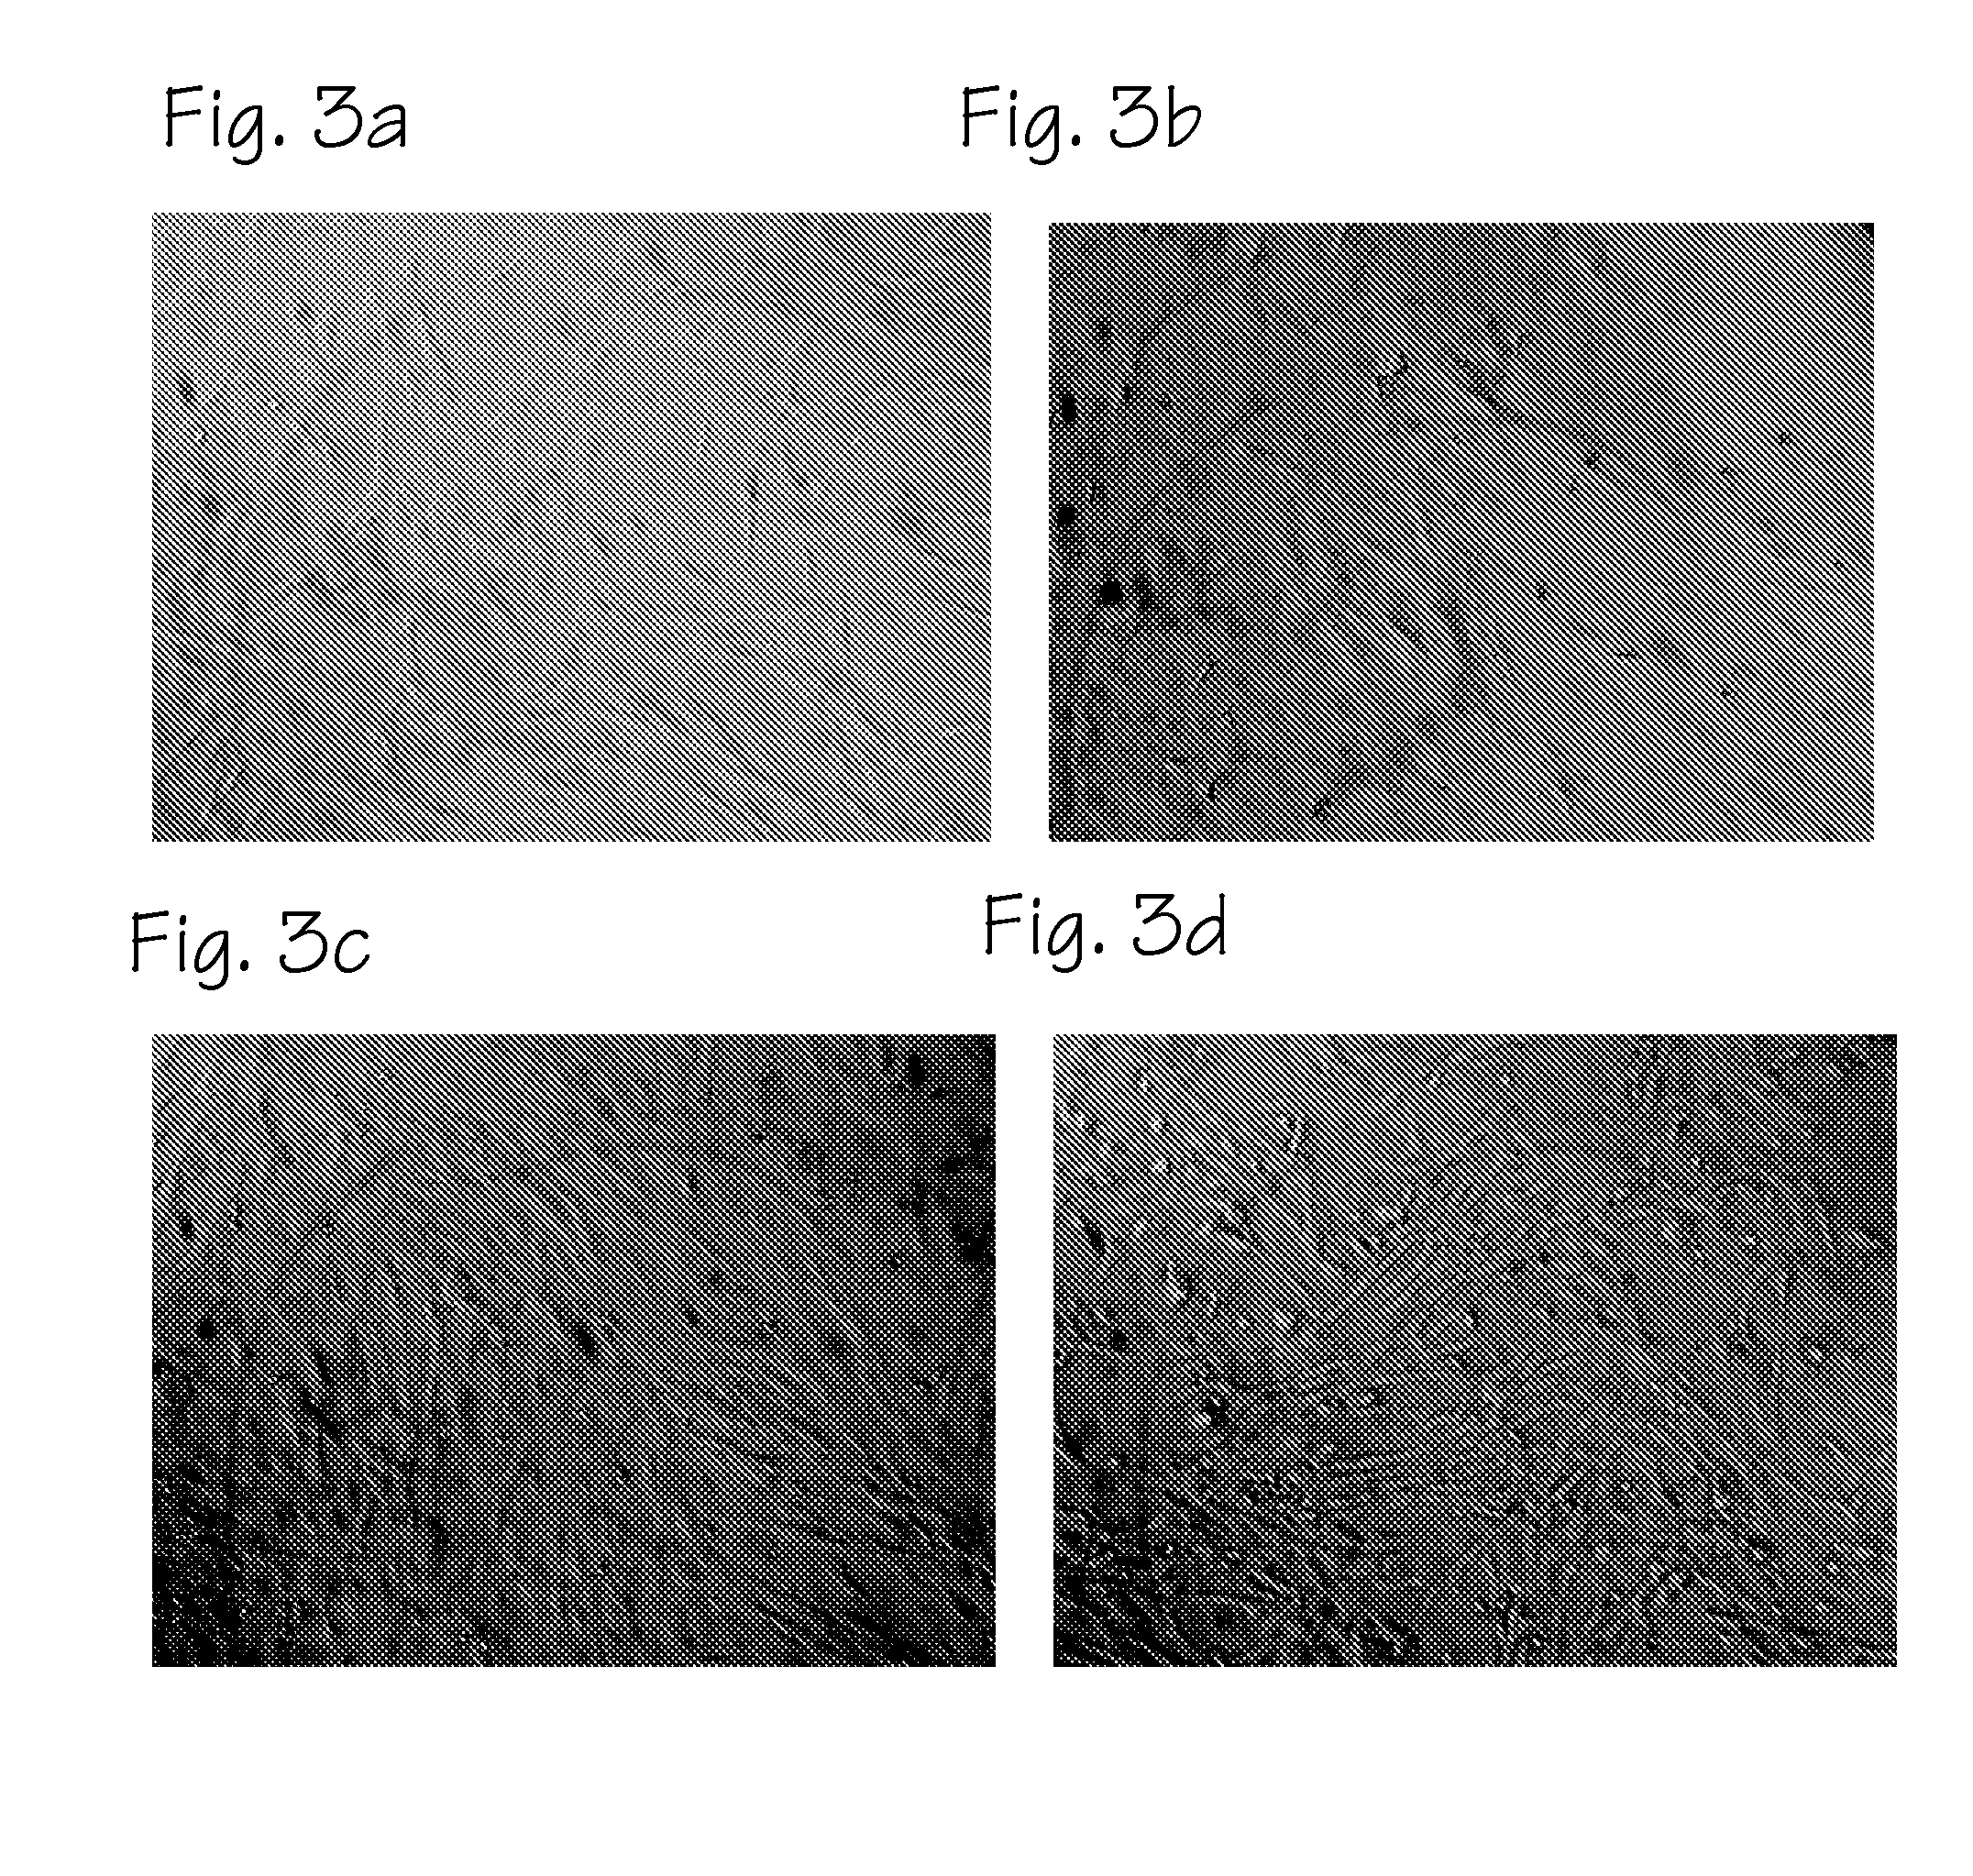 Method of preparing autologous cells and methods of use for therapy